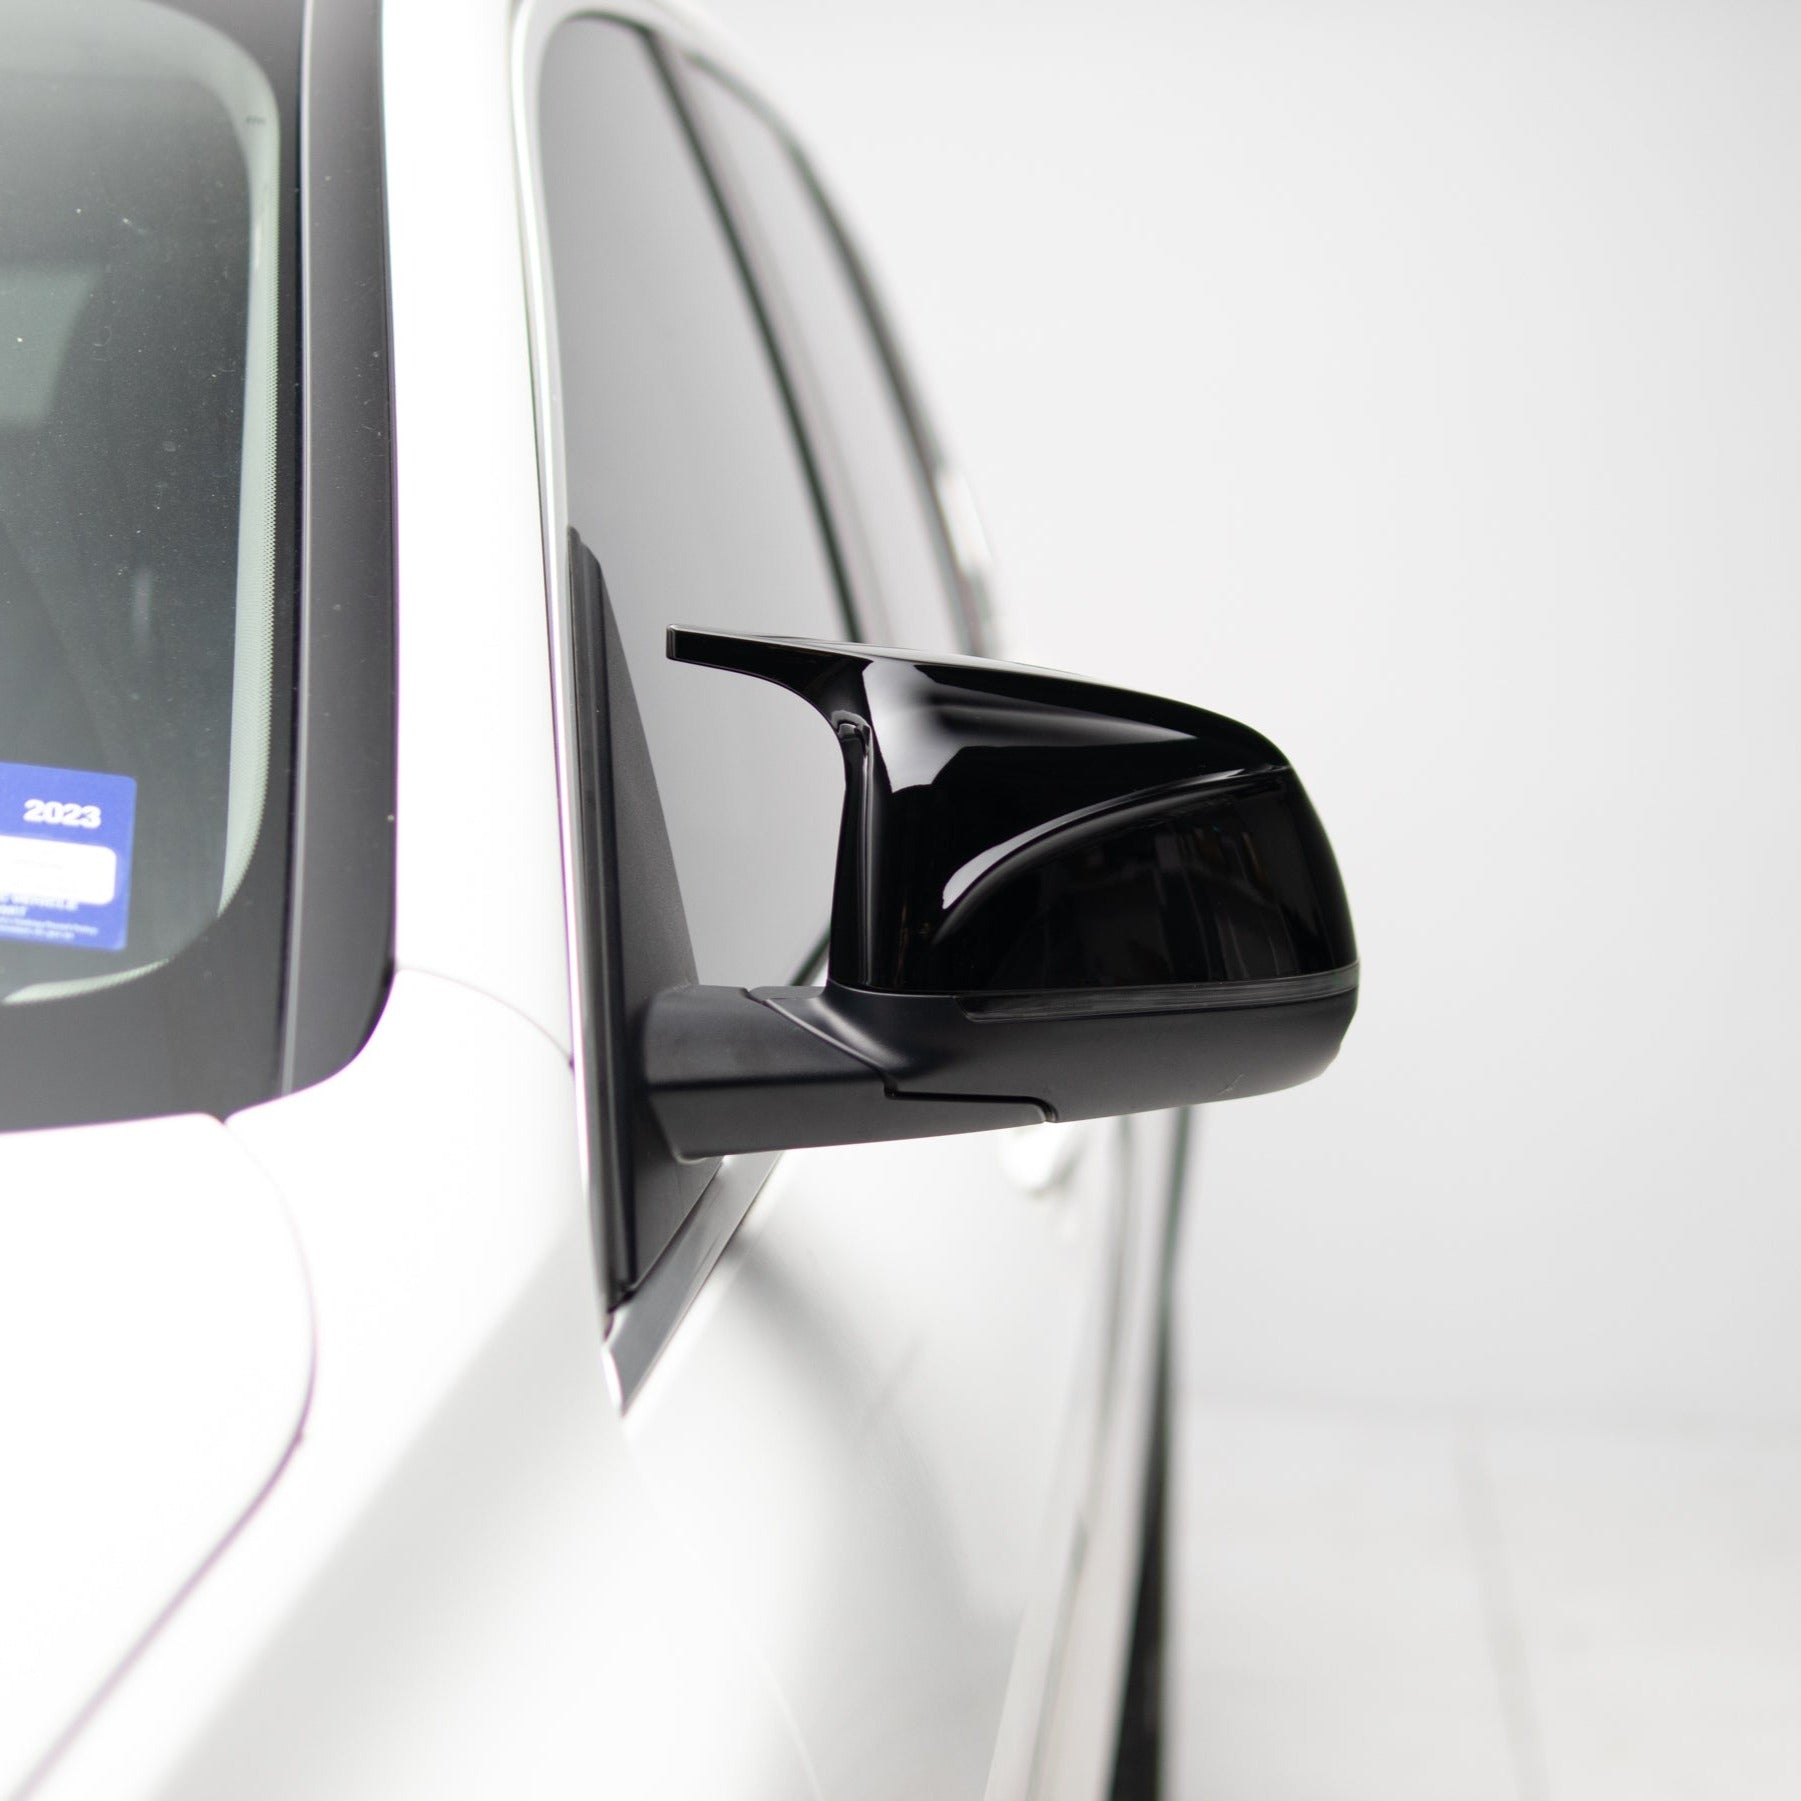 Nissan Micra Wing Mirror Covers - Ultimate Styling